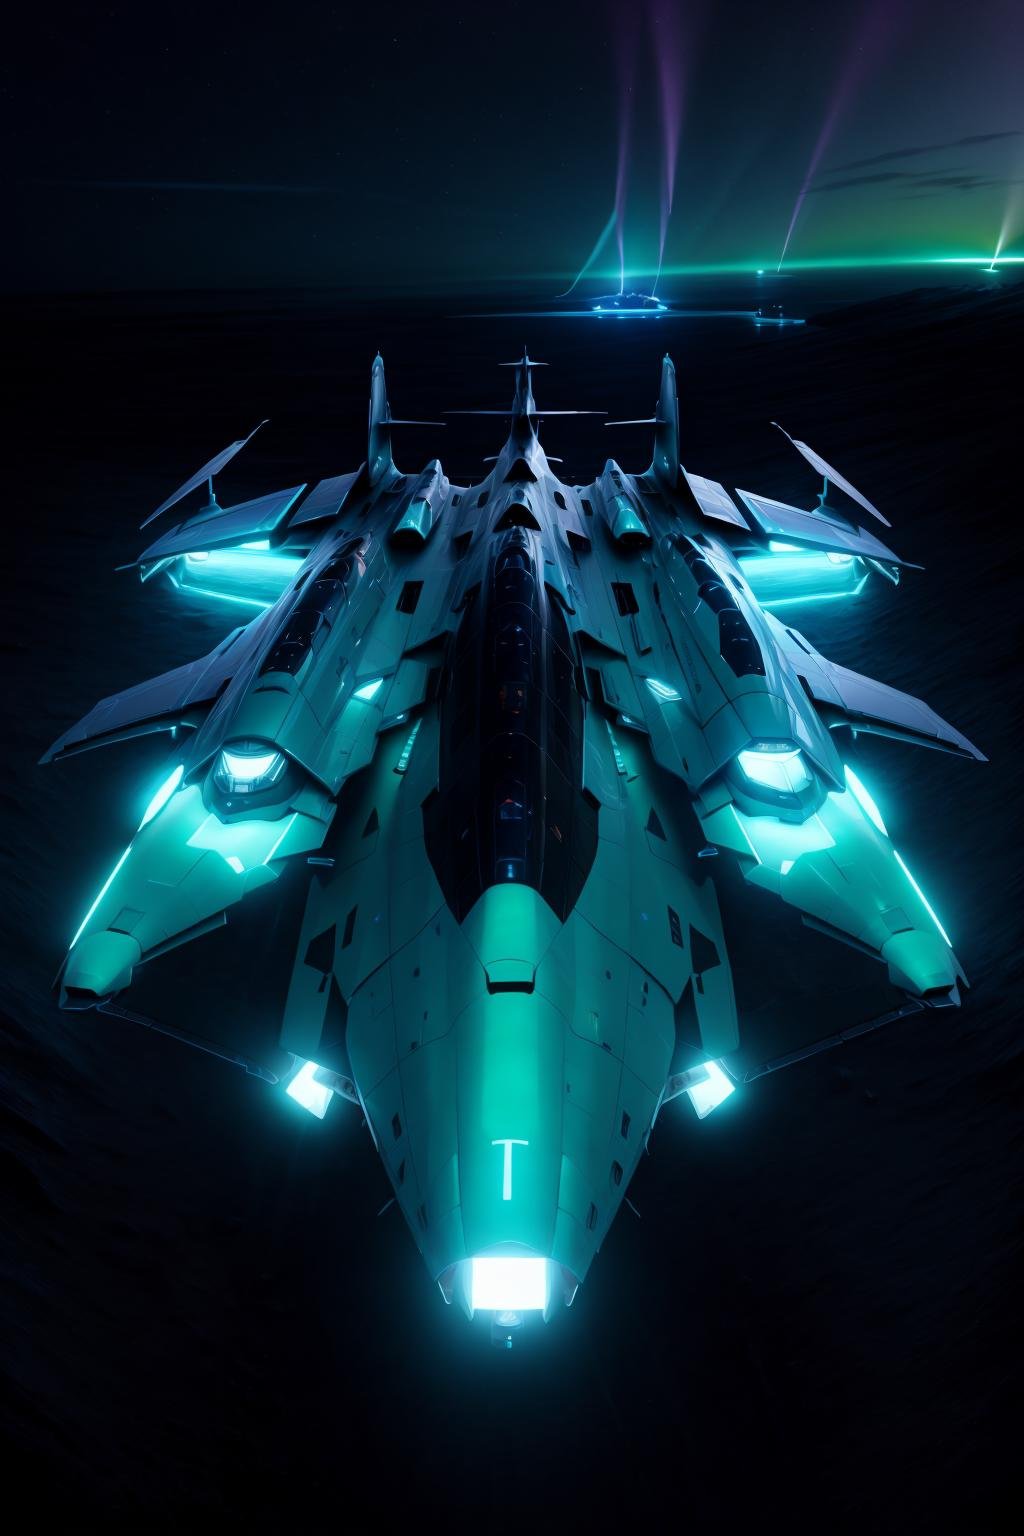 <lora:zxrspc_v3:1> Mint Blue zxrspc, masterpiece, best cinematic quality, photorealistic highly detailed 8k raw photo, volumetric lighting, volumetric shadows, reflective fuselage, A celestial phenomenon, such as the aurora borealis, dancing across the night sky